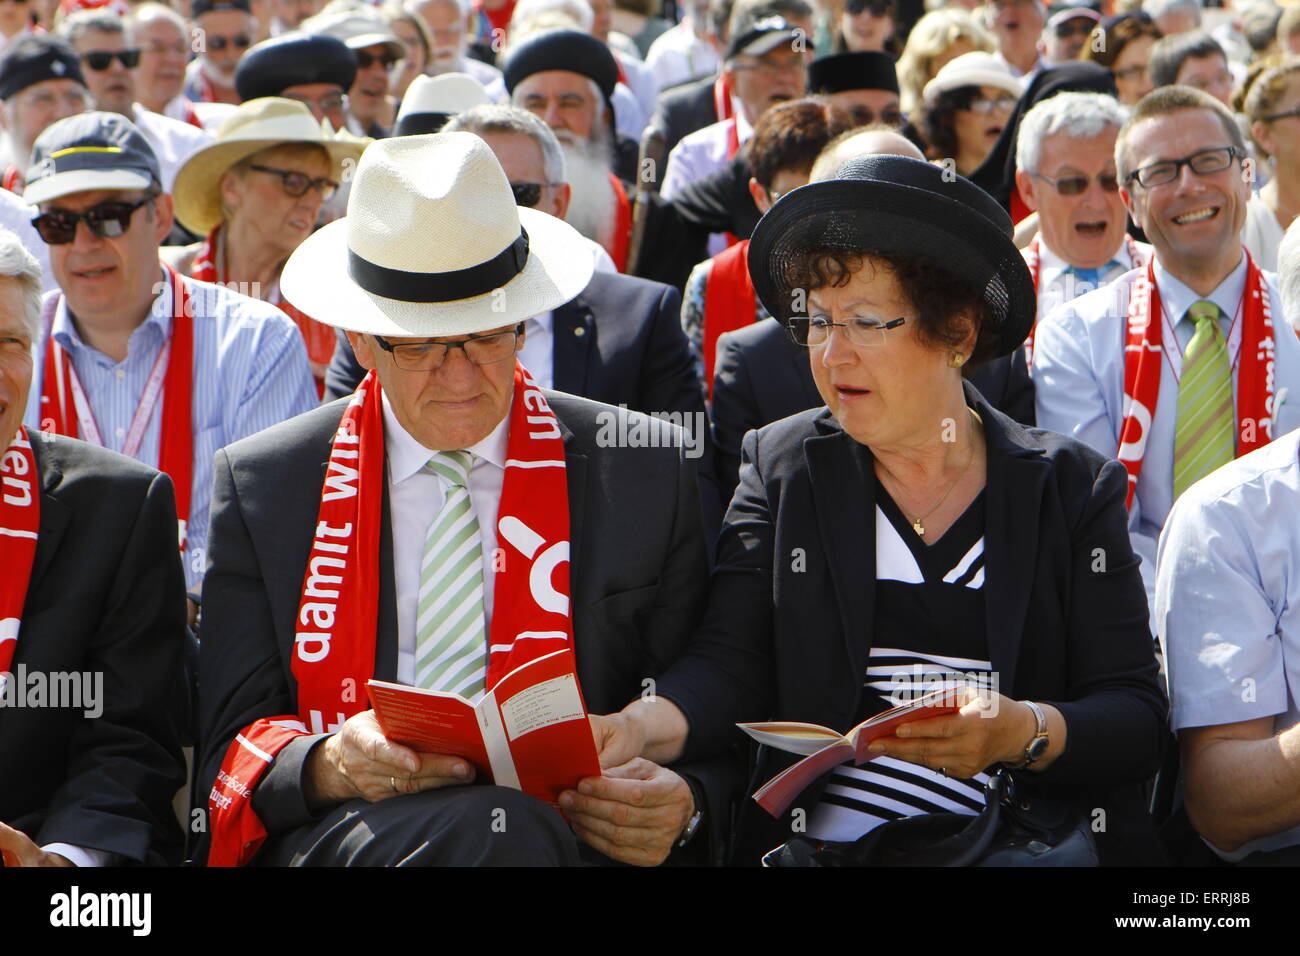 Winfried Kretschmann (left), the Minister-President of Baden-Württemberg, and his wife Gerlinde (right) are pictured at the closing ceremony of the 35th German Protestant Church Congress. 95,000 worshippers attended the closing open air service of the 35th German Protestant Church Congress in Stuttgart. © Michael Debets/Pacific Press/Alamy Live News Stock Photo